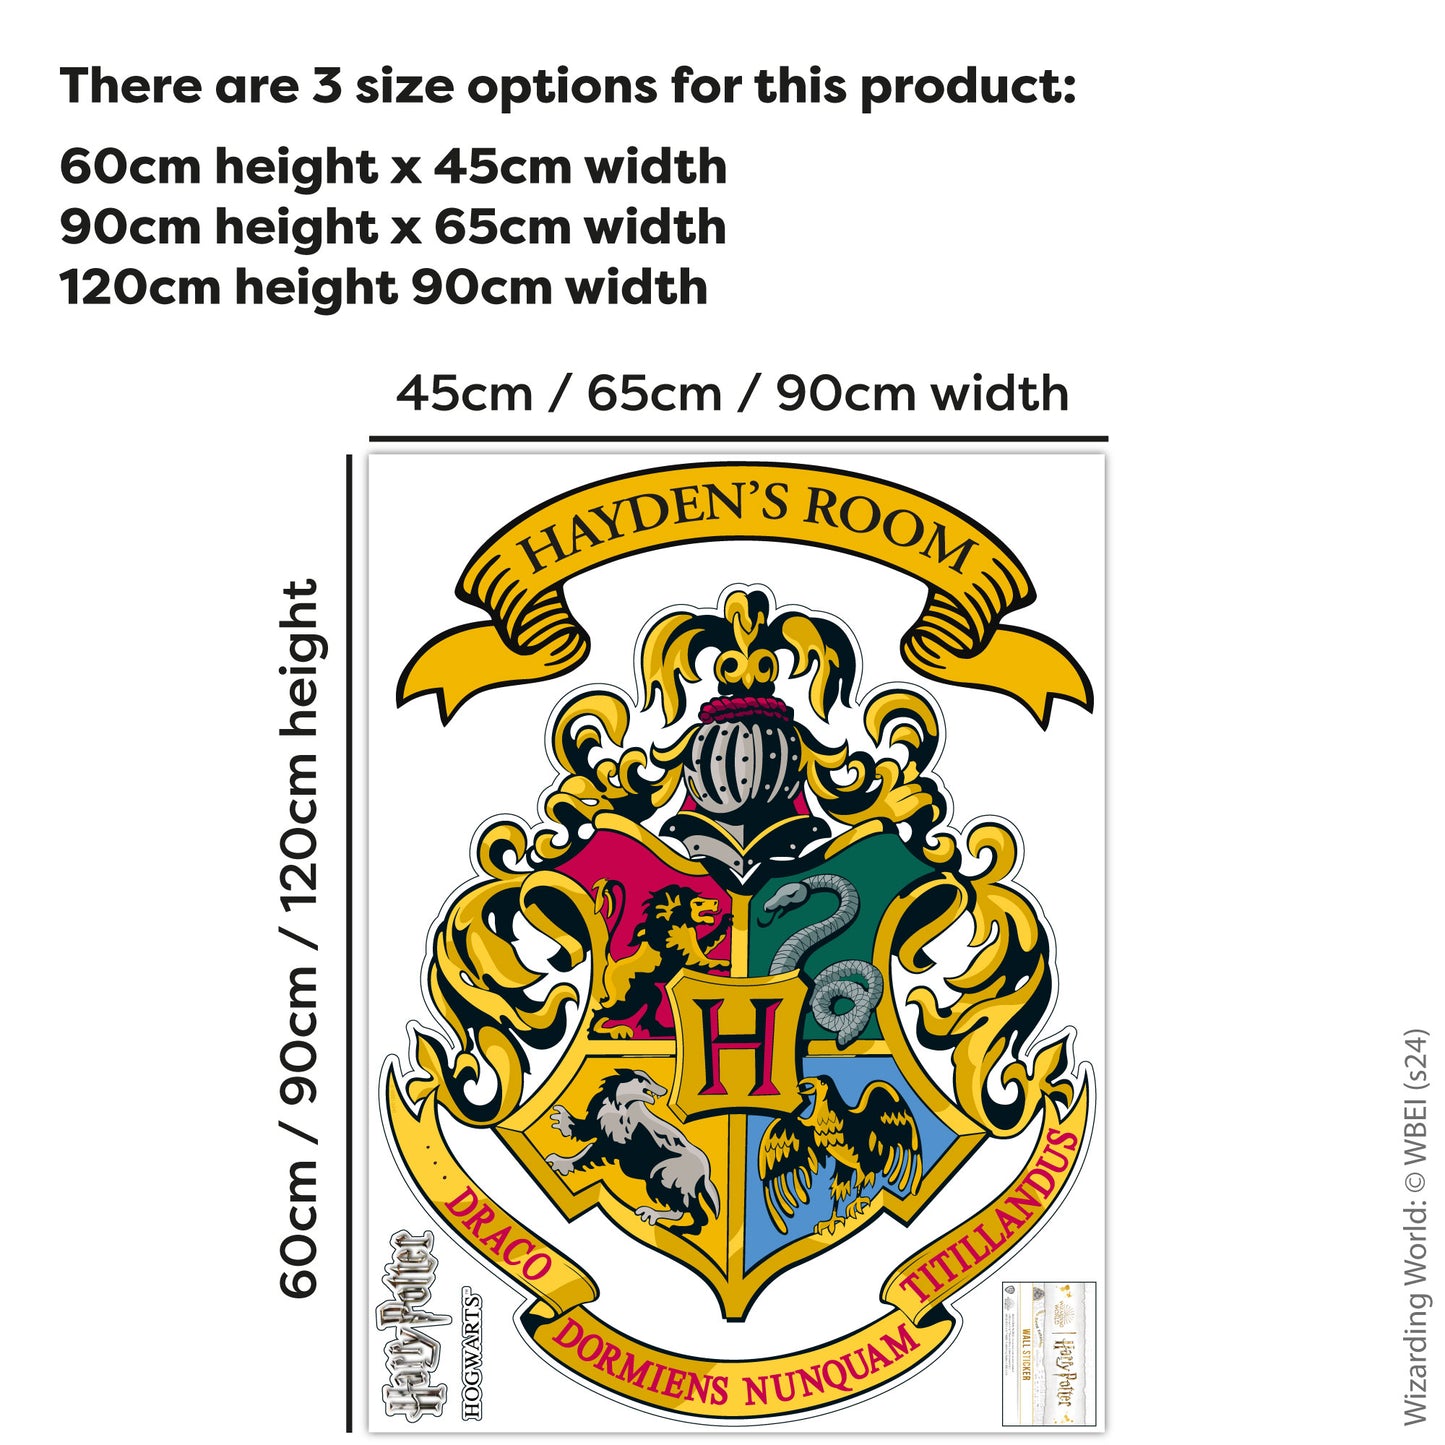 HARRY POTTER Wall Sticker – Hogwarts Crest Personalised Wall Decal Wizarding World Art